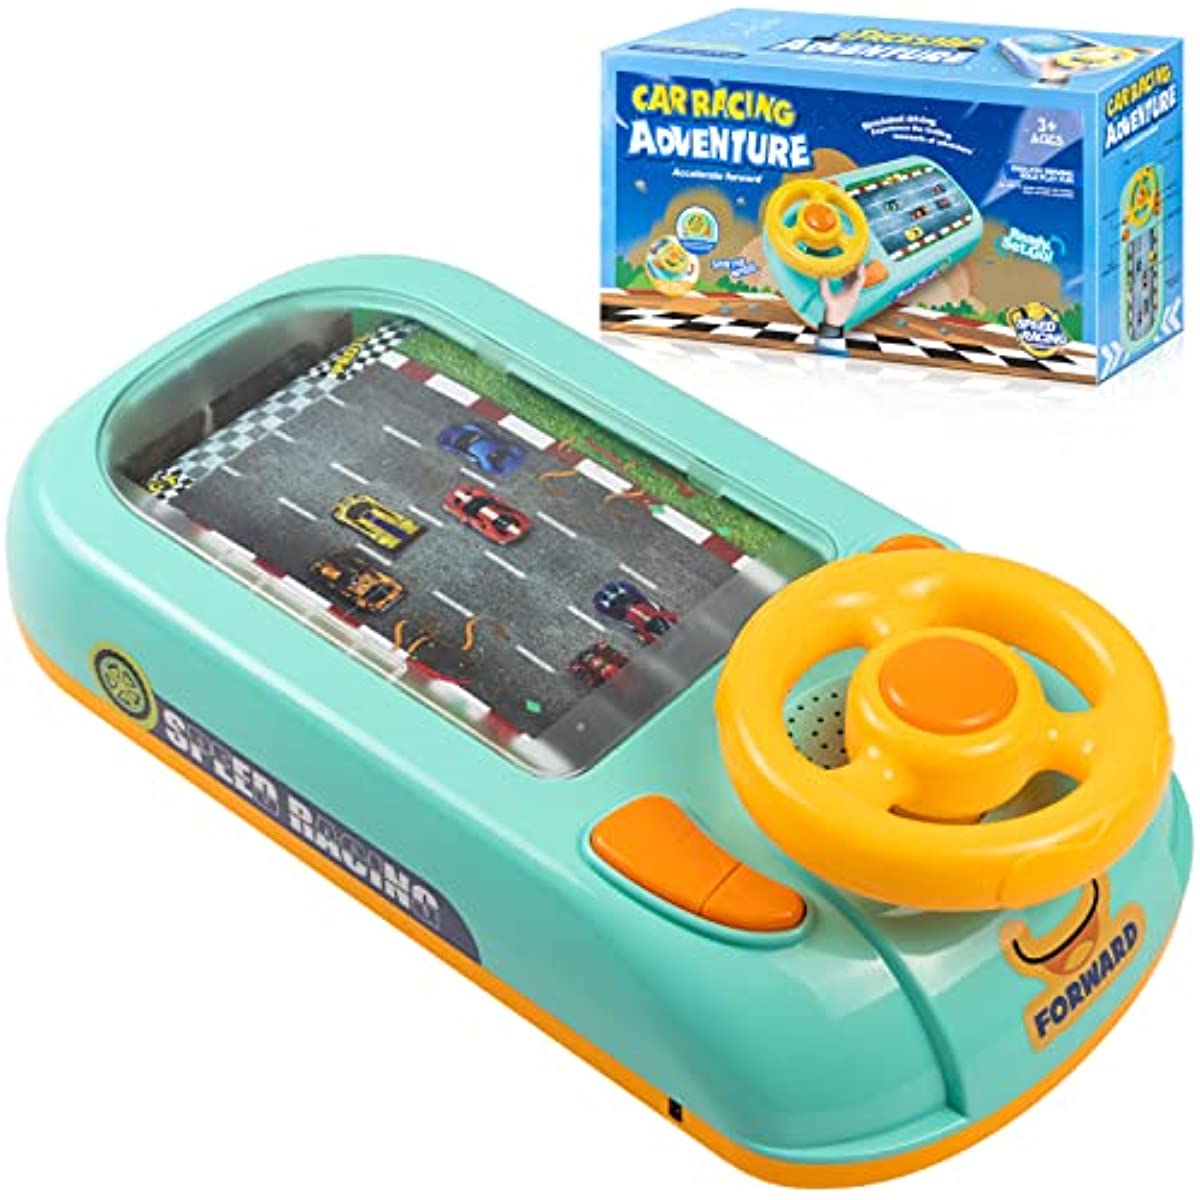 Novely Baby Musical Steering Wheel Toy Toddler Simulerat Driving Racing Car Game With Sound Interactive Education Learning Race Car Toys Gift